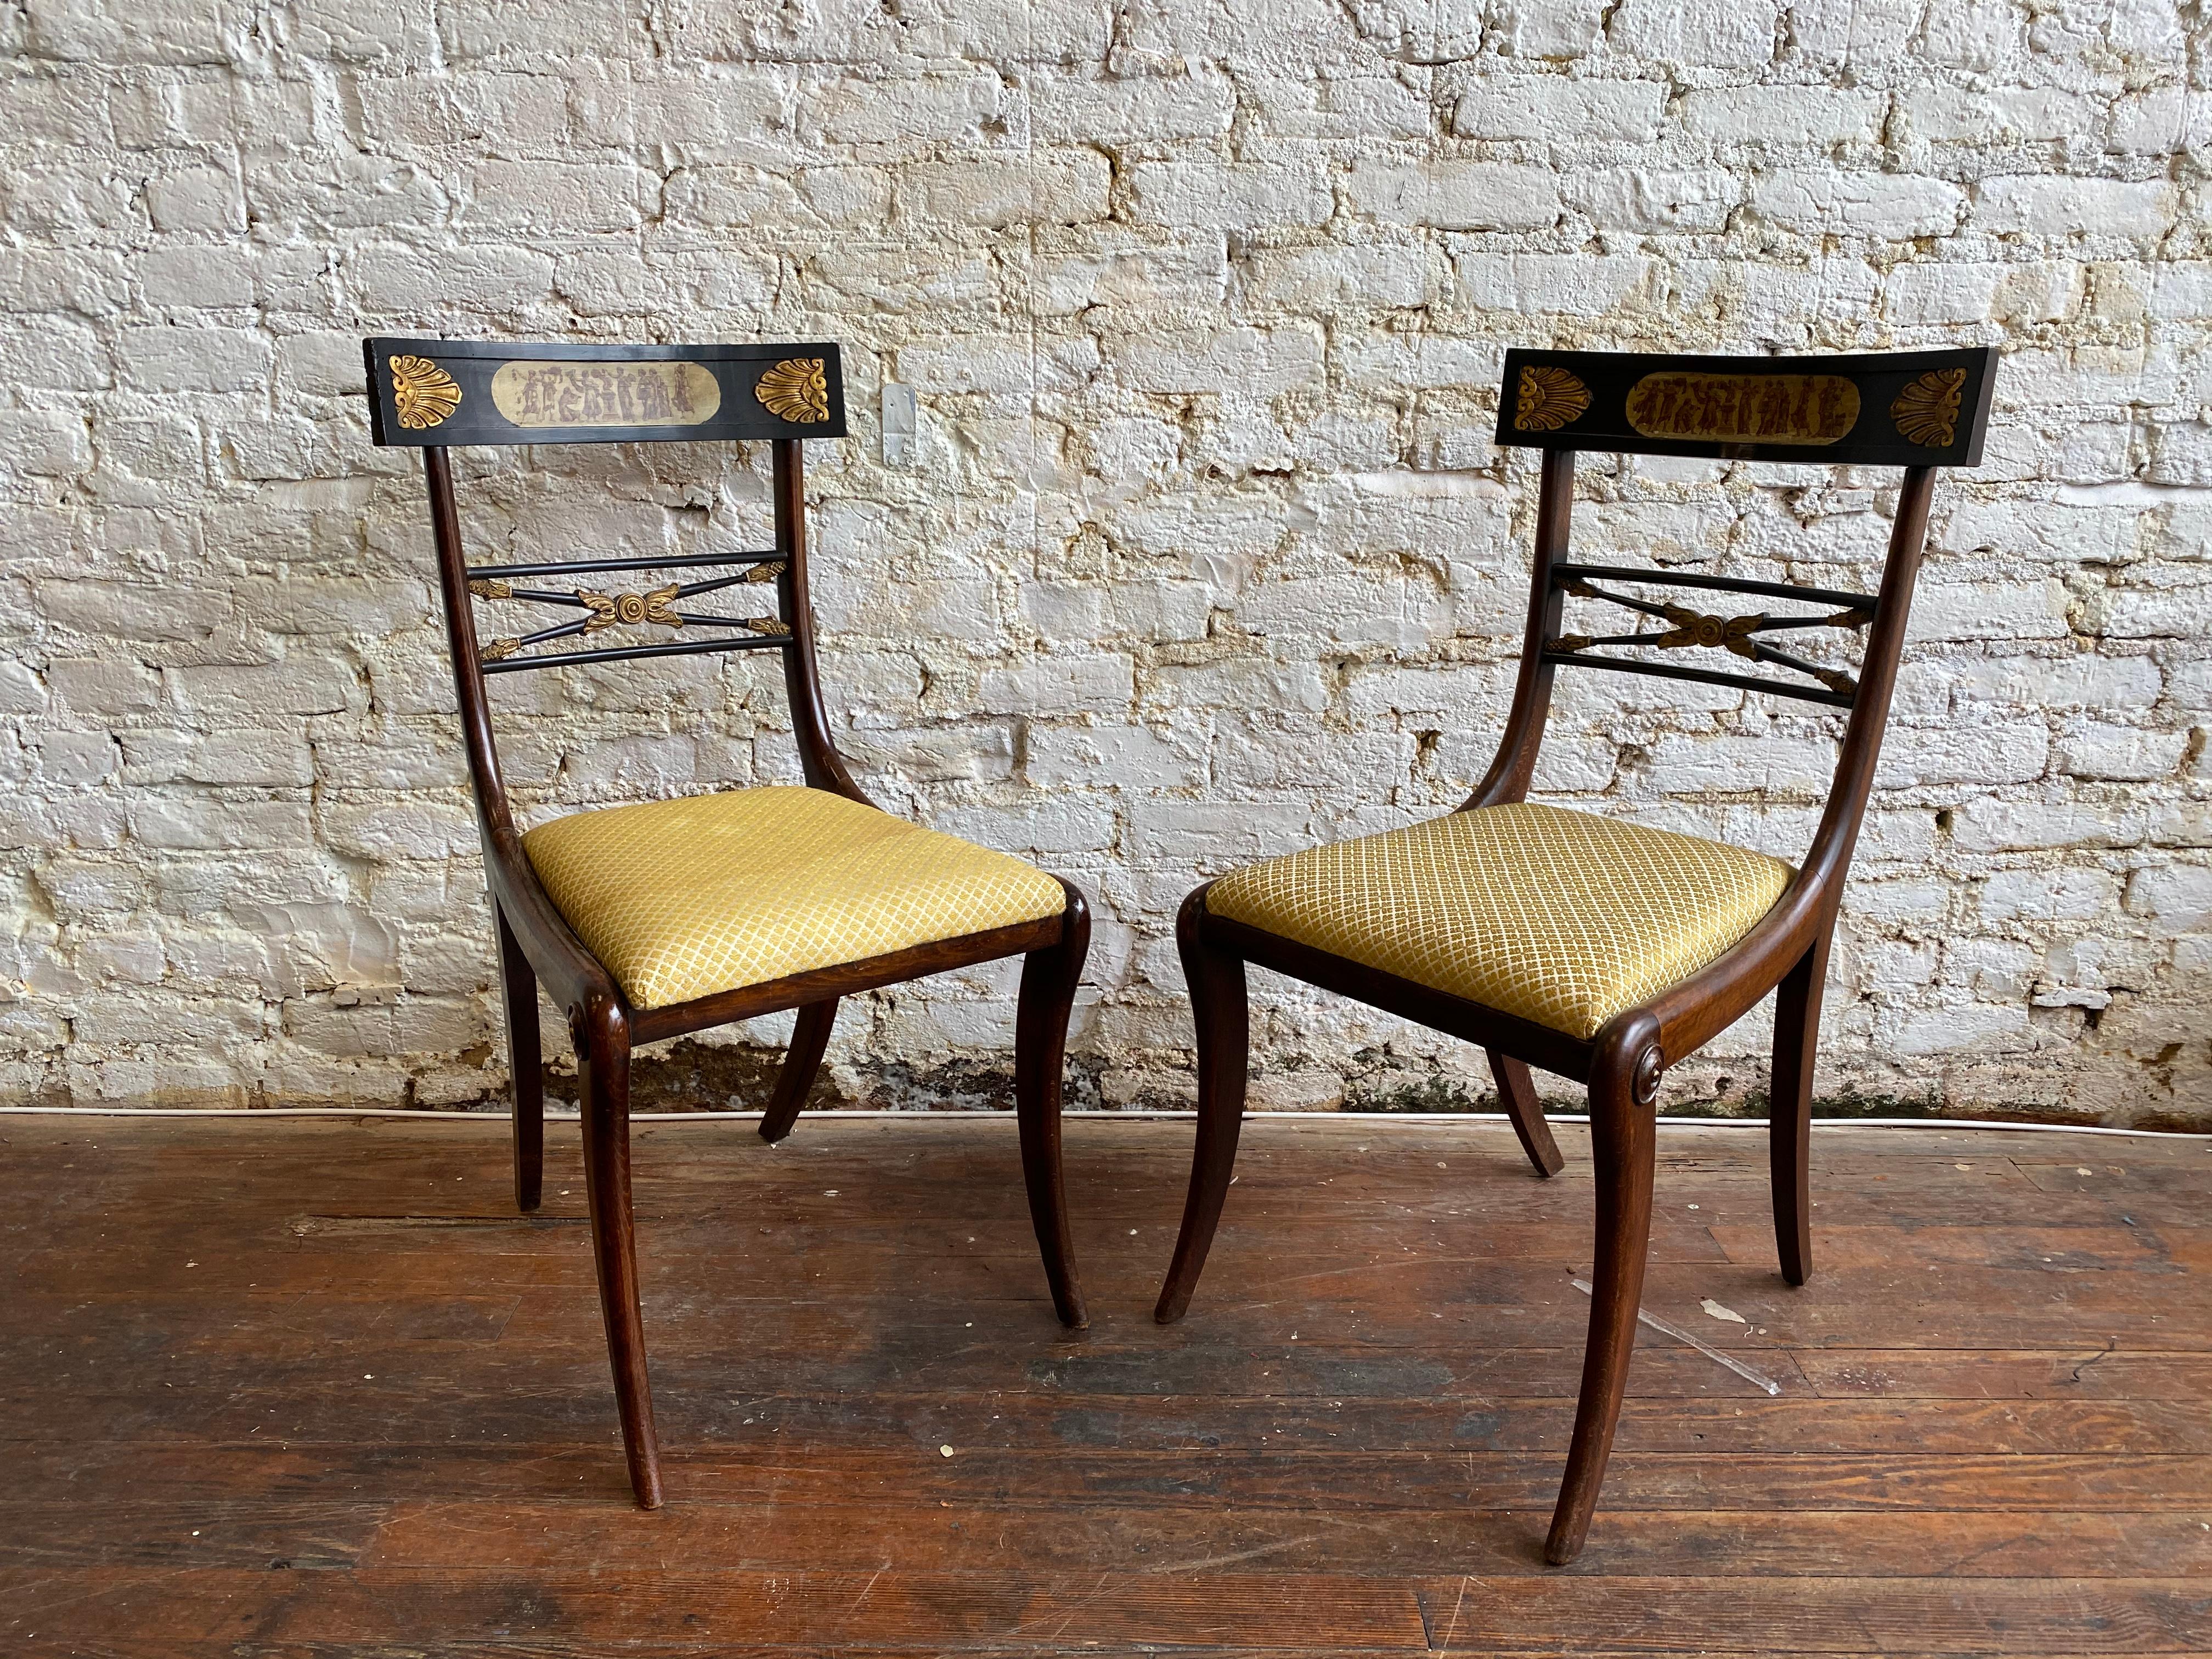 19th Century English Regency Faux Rosewood Chairs with Neoclassical Scenes, Pair 1